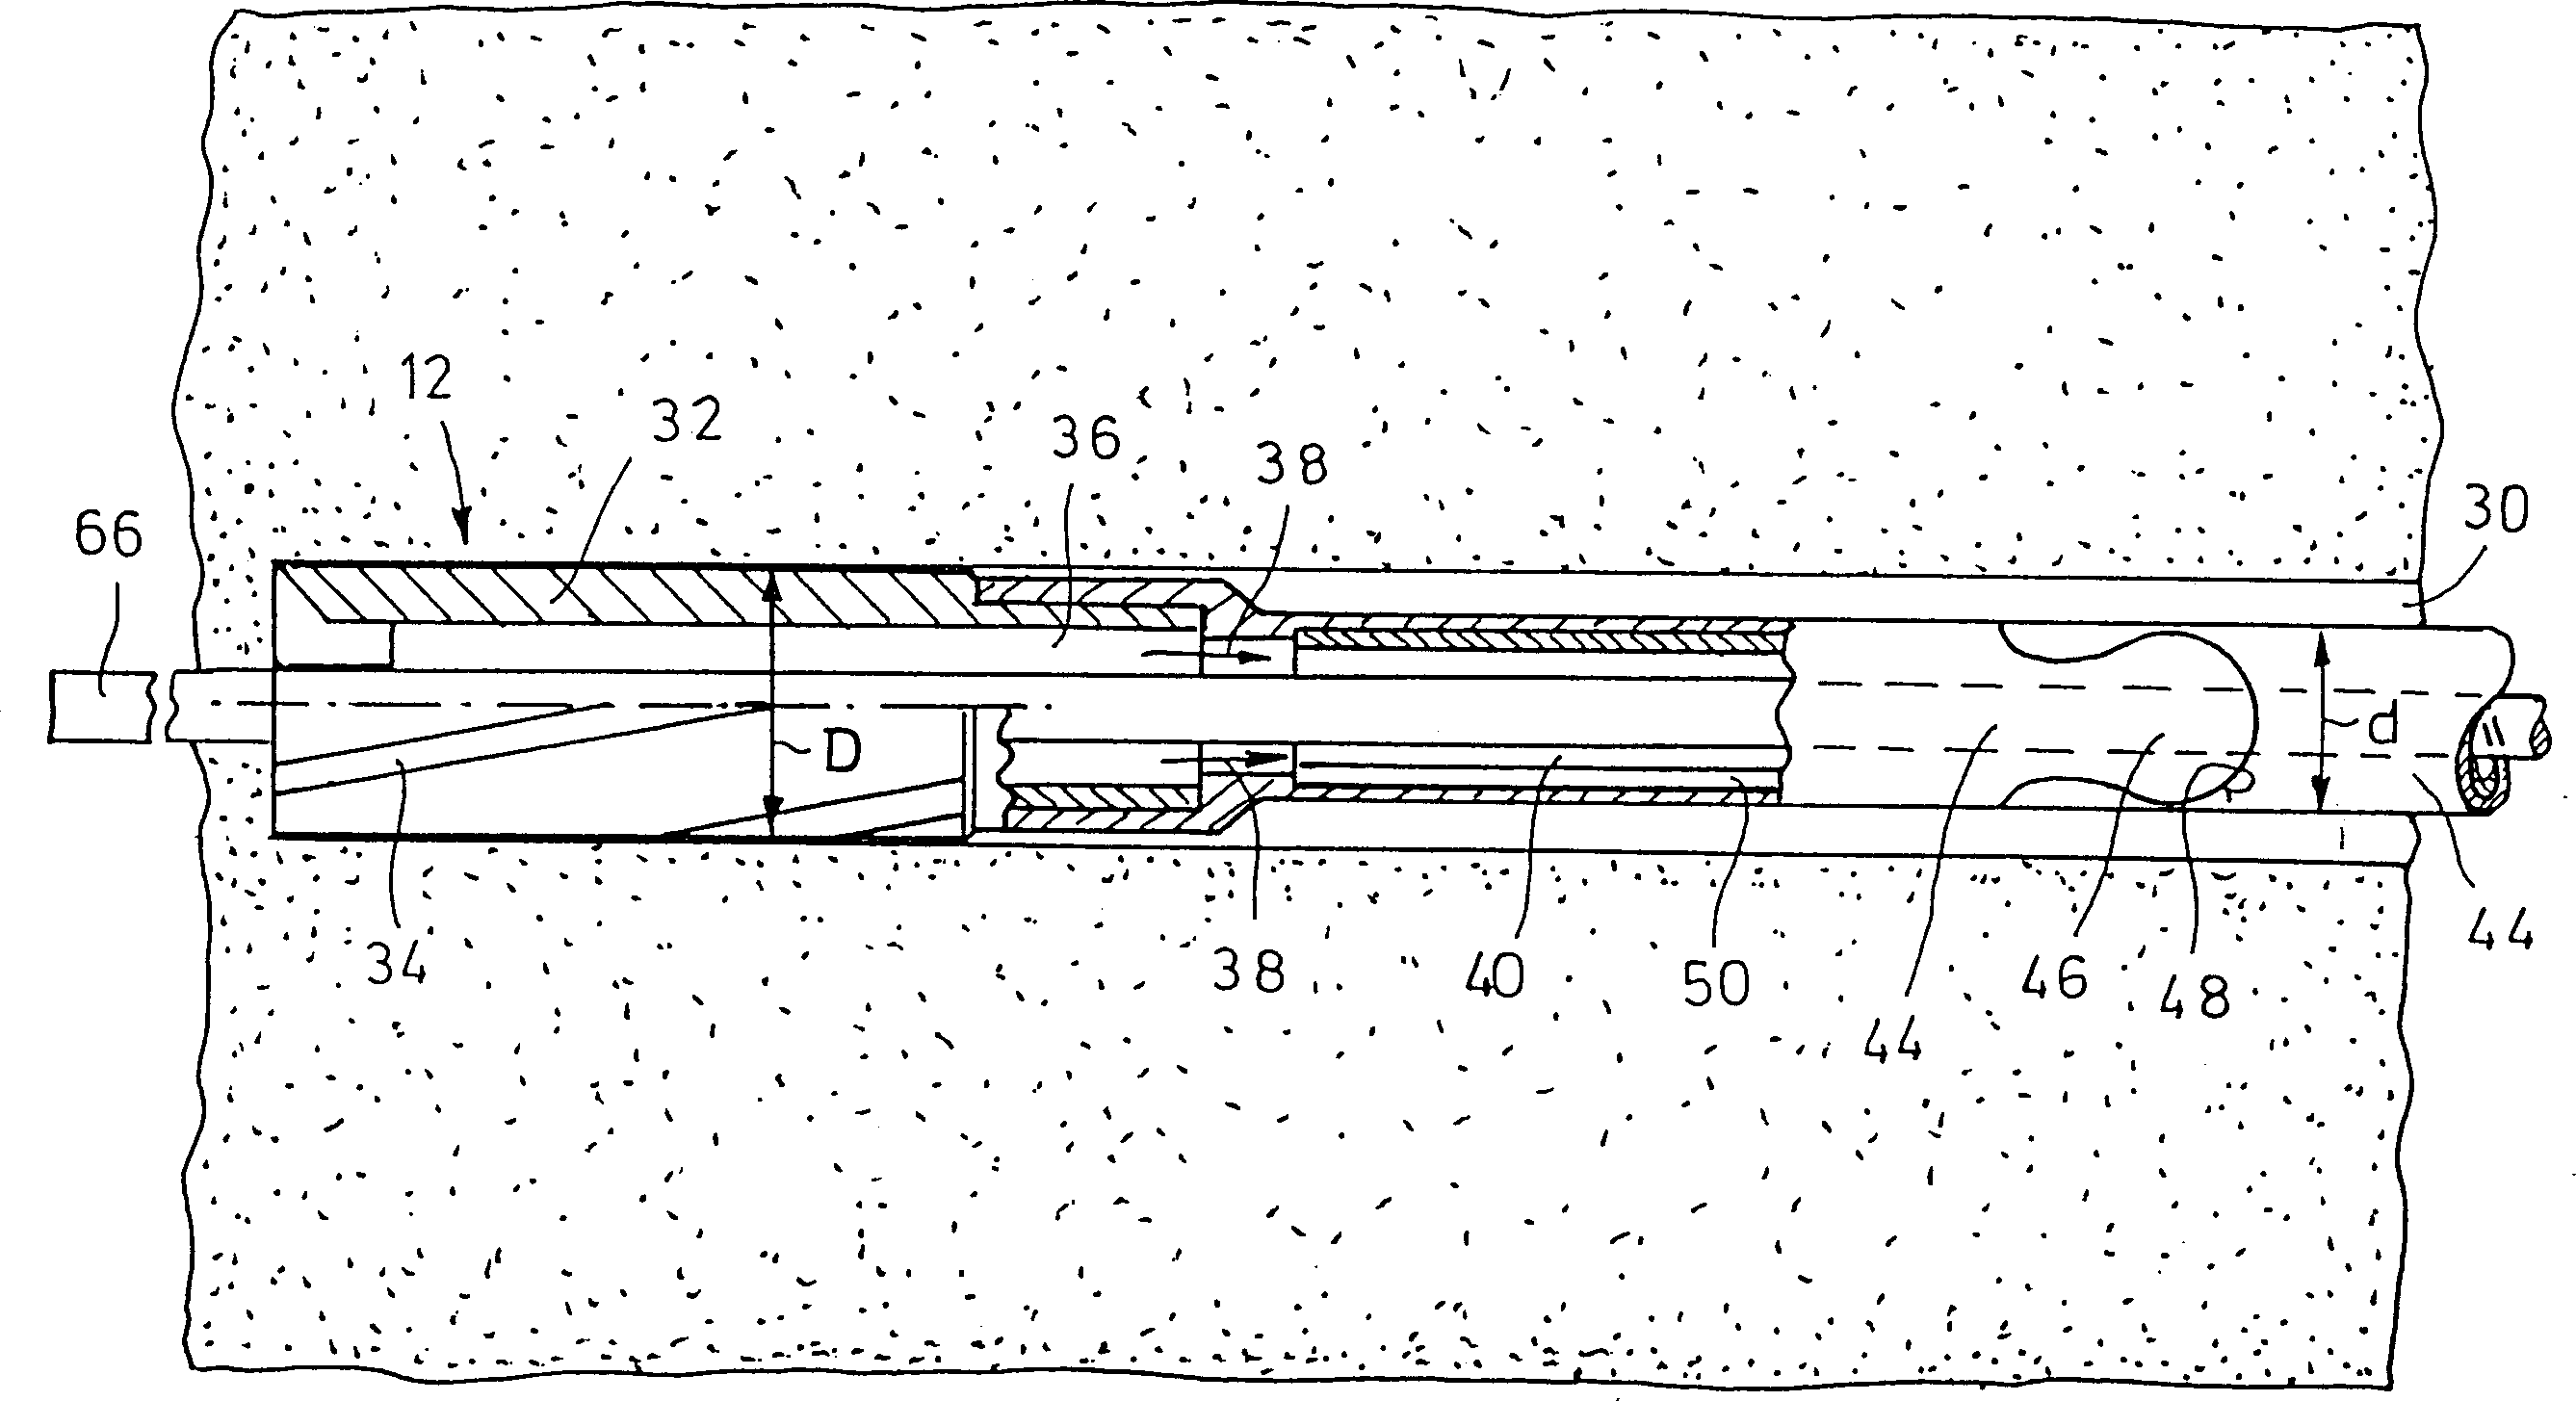 Device for treating human and/or animal tissue